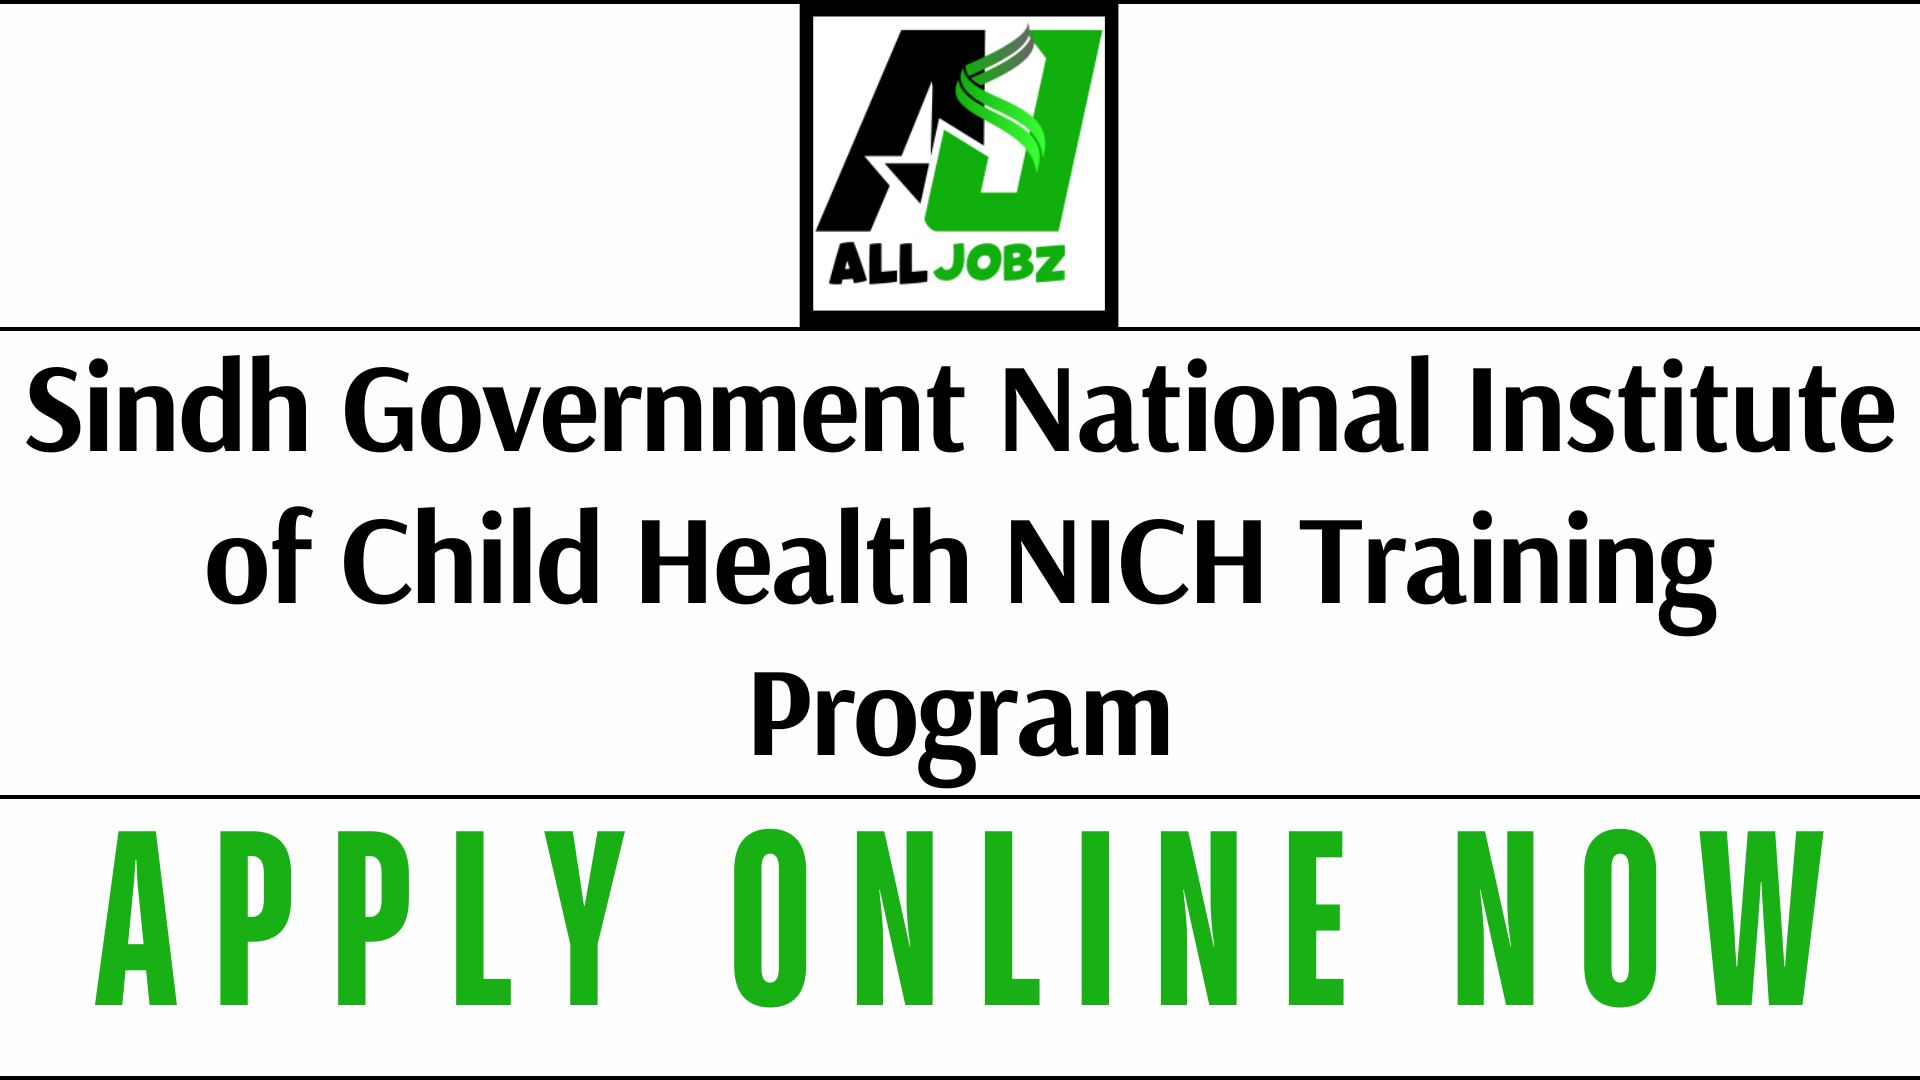 The Sindh Government National Institute Of Child Health Nich Training Program In Sindh Is Pleased To Announce The Opening Of Applications For Specialized Training Programs In Various Pediatric Specialties And Sub-Specialties. Nich Opd Schedule, Nich Karachi Contact Number, Nich Karachi Address, National Institute Of Child Health Karachi Jobs. These Prestigious Programs Offer Unparalleled Opportunities For Medical Professionals Seeking To Advance Their Expertise In Pediatric Care. The Detailed Eligibility Criteria And Application Processes For Each Program Are Provided Below. Sindh Government National Institute Of Child Health Nich Training Program, Nich Opd Schedule, Nich Karachi Contact Number, Nich Karachi Address, National Institute Of Child Health Karachi Jobs, National Institute Of Child Health Jobs, National Institute Of Child Health (Nich) Karachi, Nich Jobs 2024 Online Apply, Nich Sukkur Jobs, Nich Residency 2024. Nich Volunteer Program,